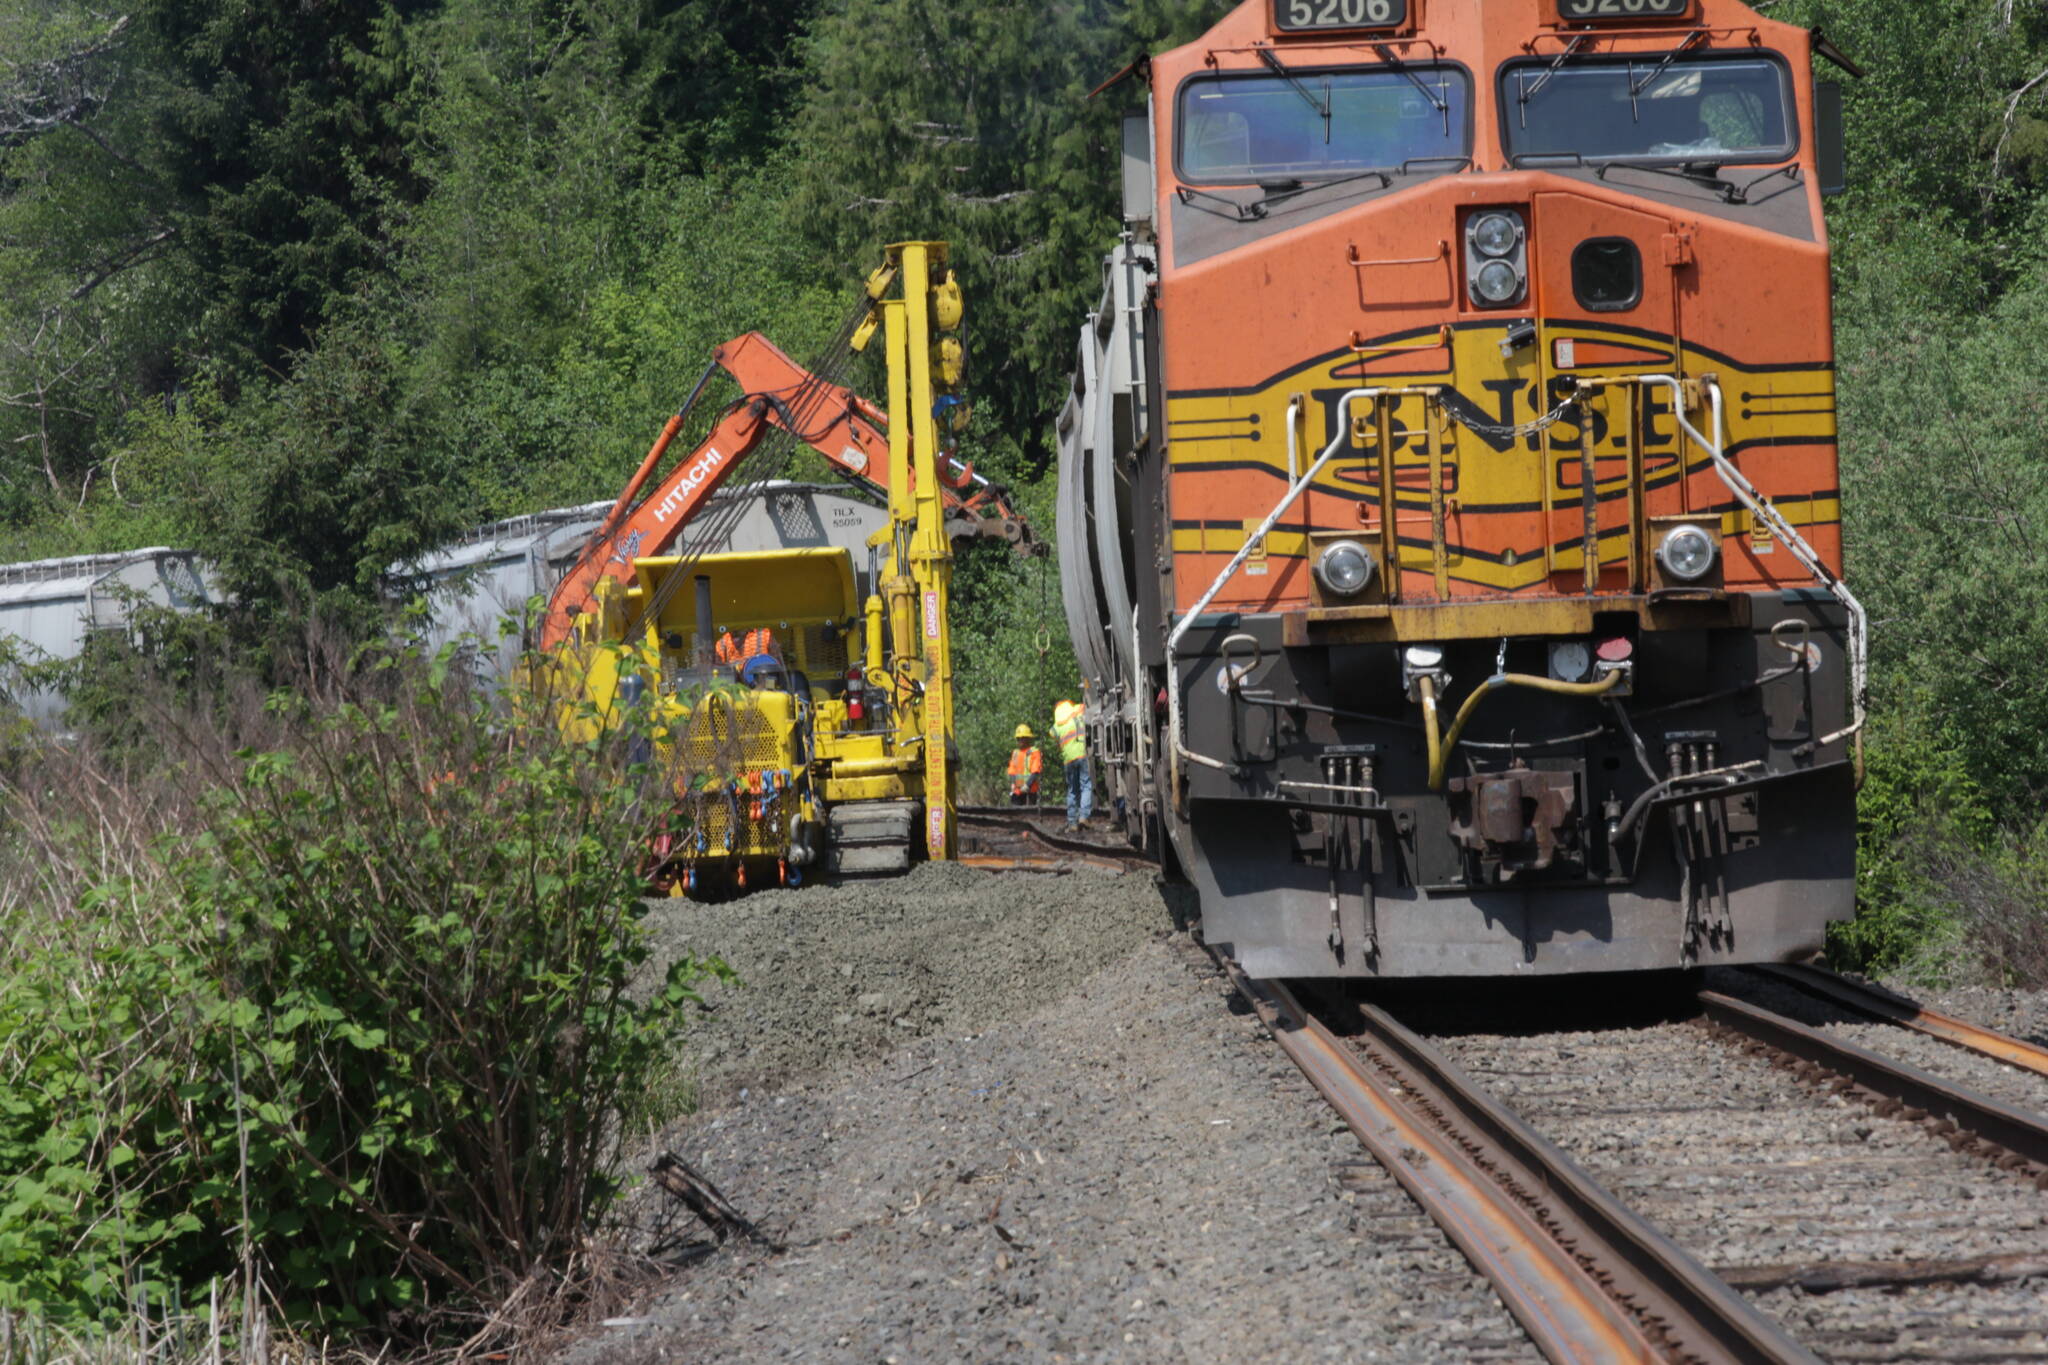 Crews work to rerail train cars carrying soymeal on May 17 on a Puget Sound & Pacific Railroad train that had eight cars derail Sunday in Central Park as a result of thermal misalignment, or heat expansion, of the tracks. (Michael S. Lockett / The Daily World)